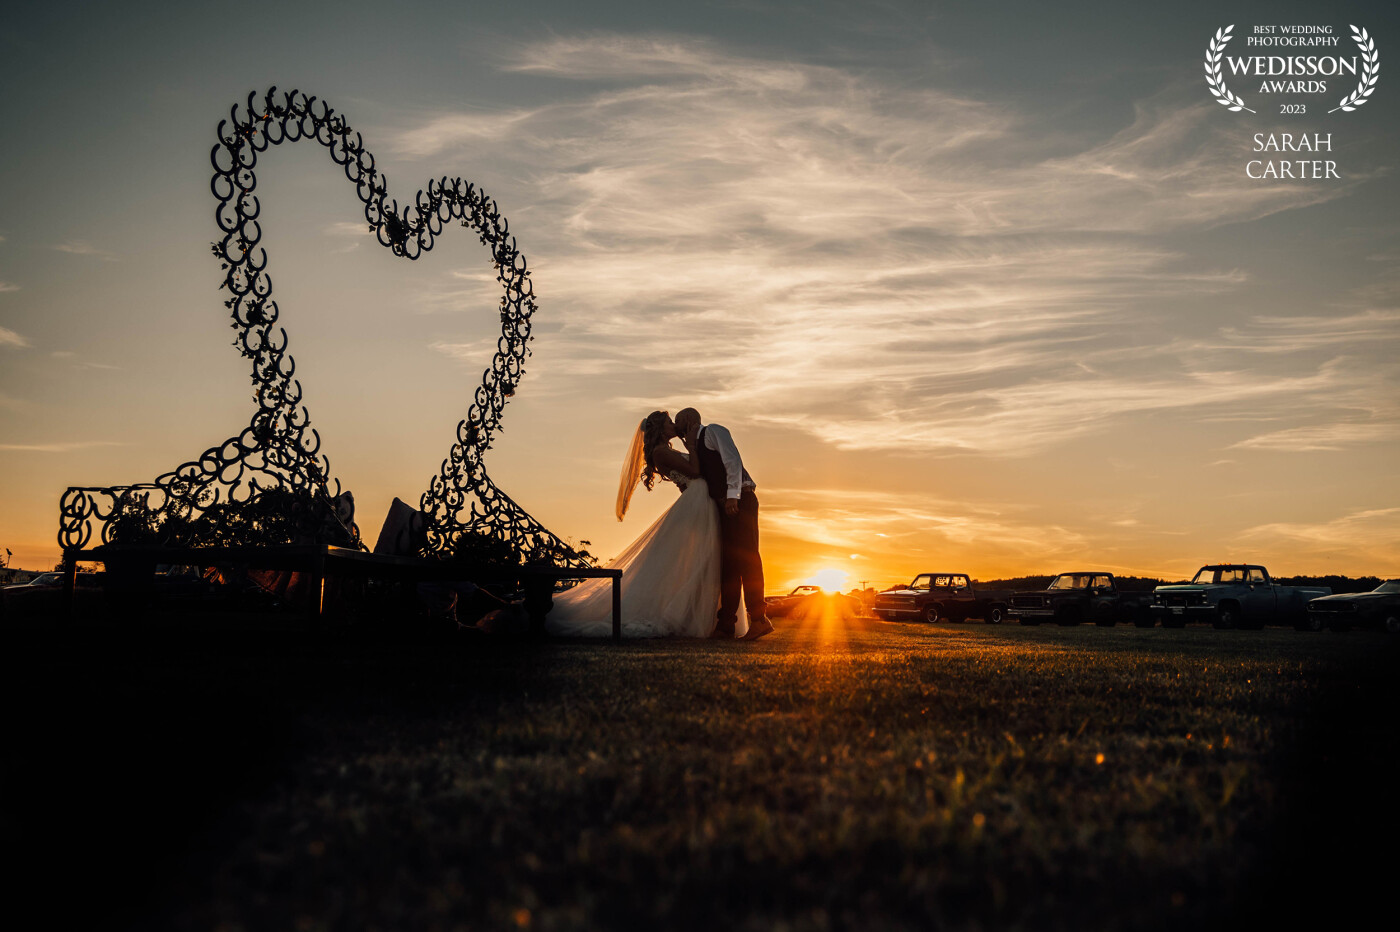 When I saw the heart made of horse shoes (the groom made this) I knew we had to get it in a photo. So we waited for sunset so we could get some nice silhouettes.